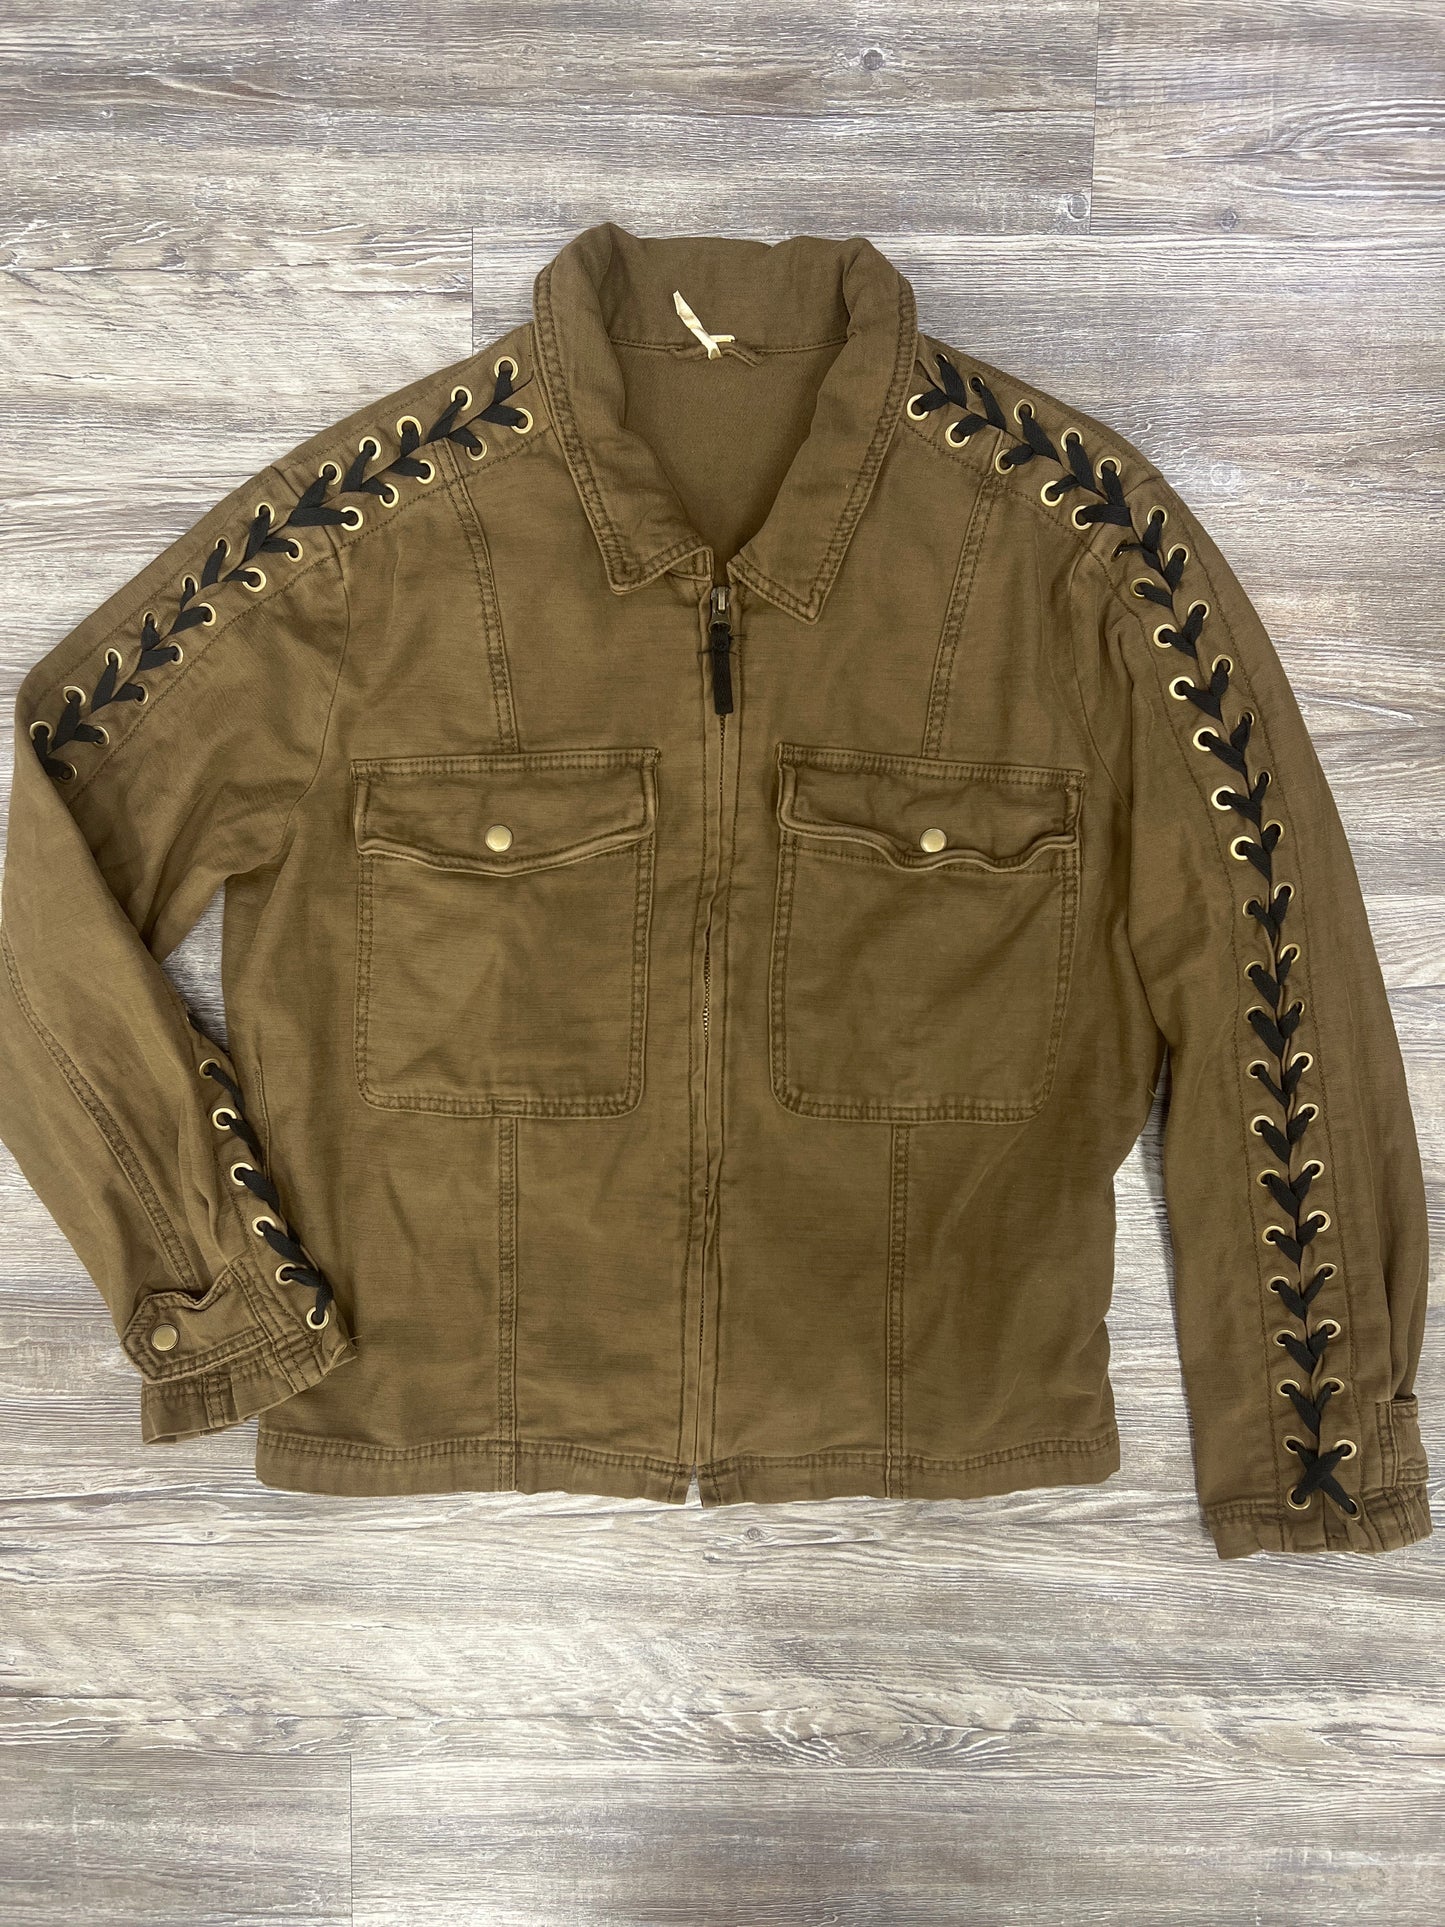 Green Jacket Other Free People, Size L